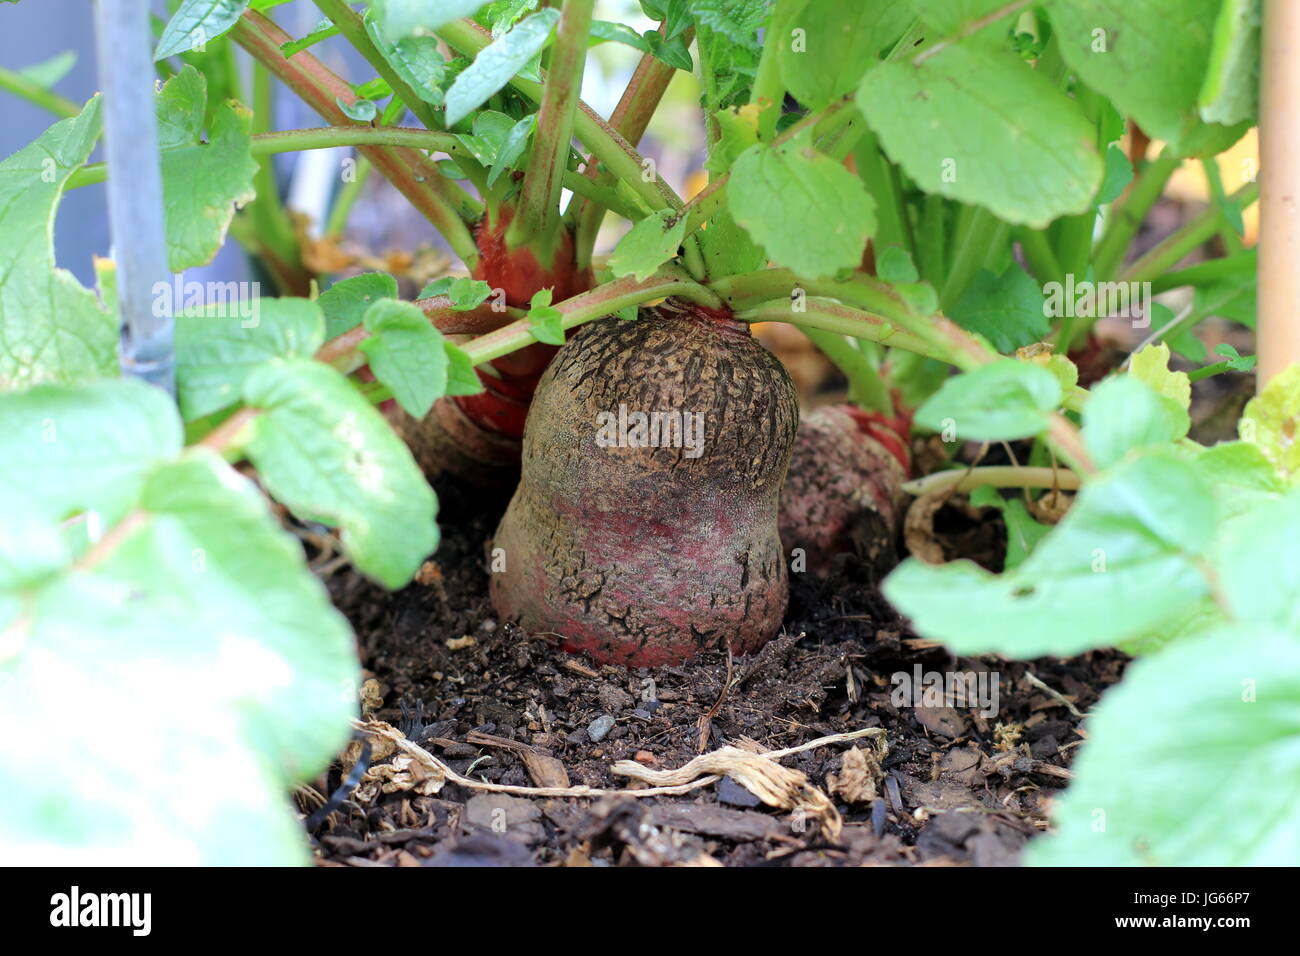 Overgrown old  Raphanus raphanistrum or known as Radish growing in the ground Stock Photo